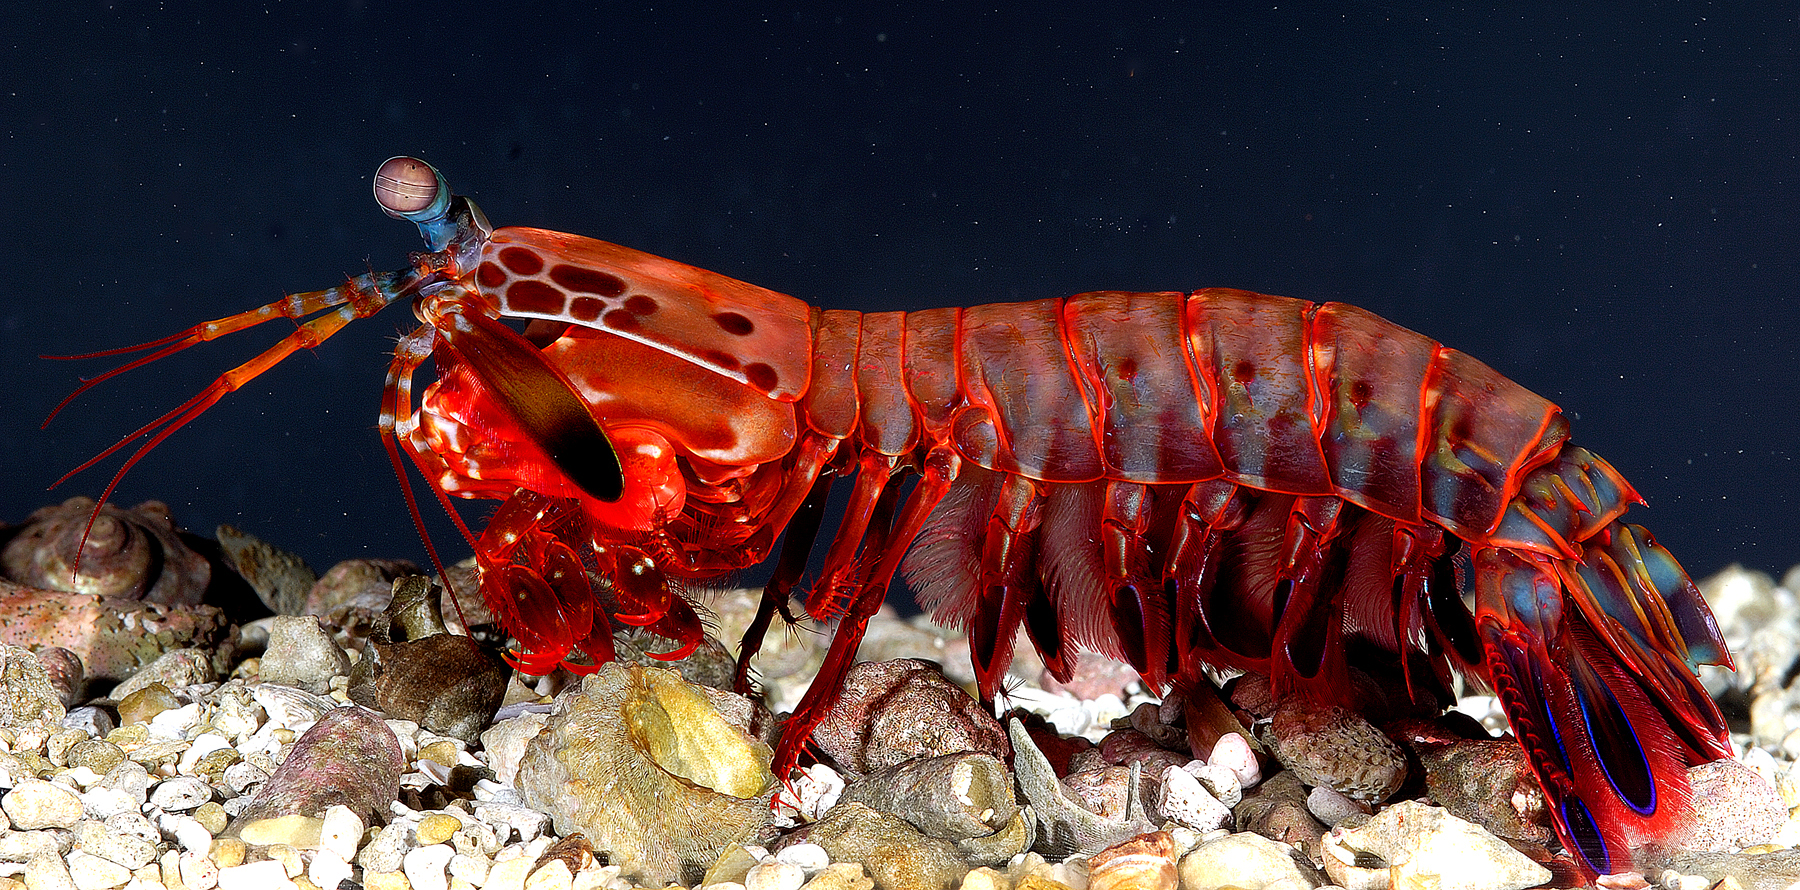 Image of the Mantis shrimp from Wikipedia